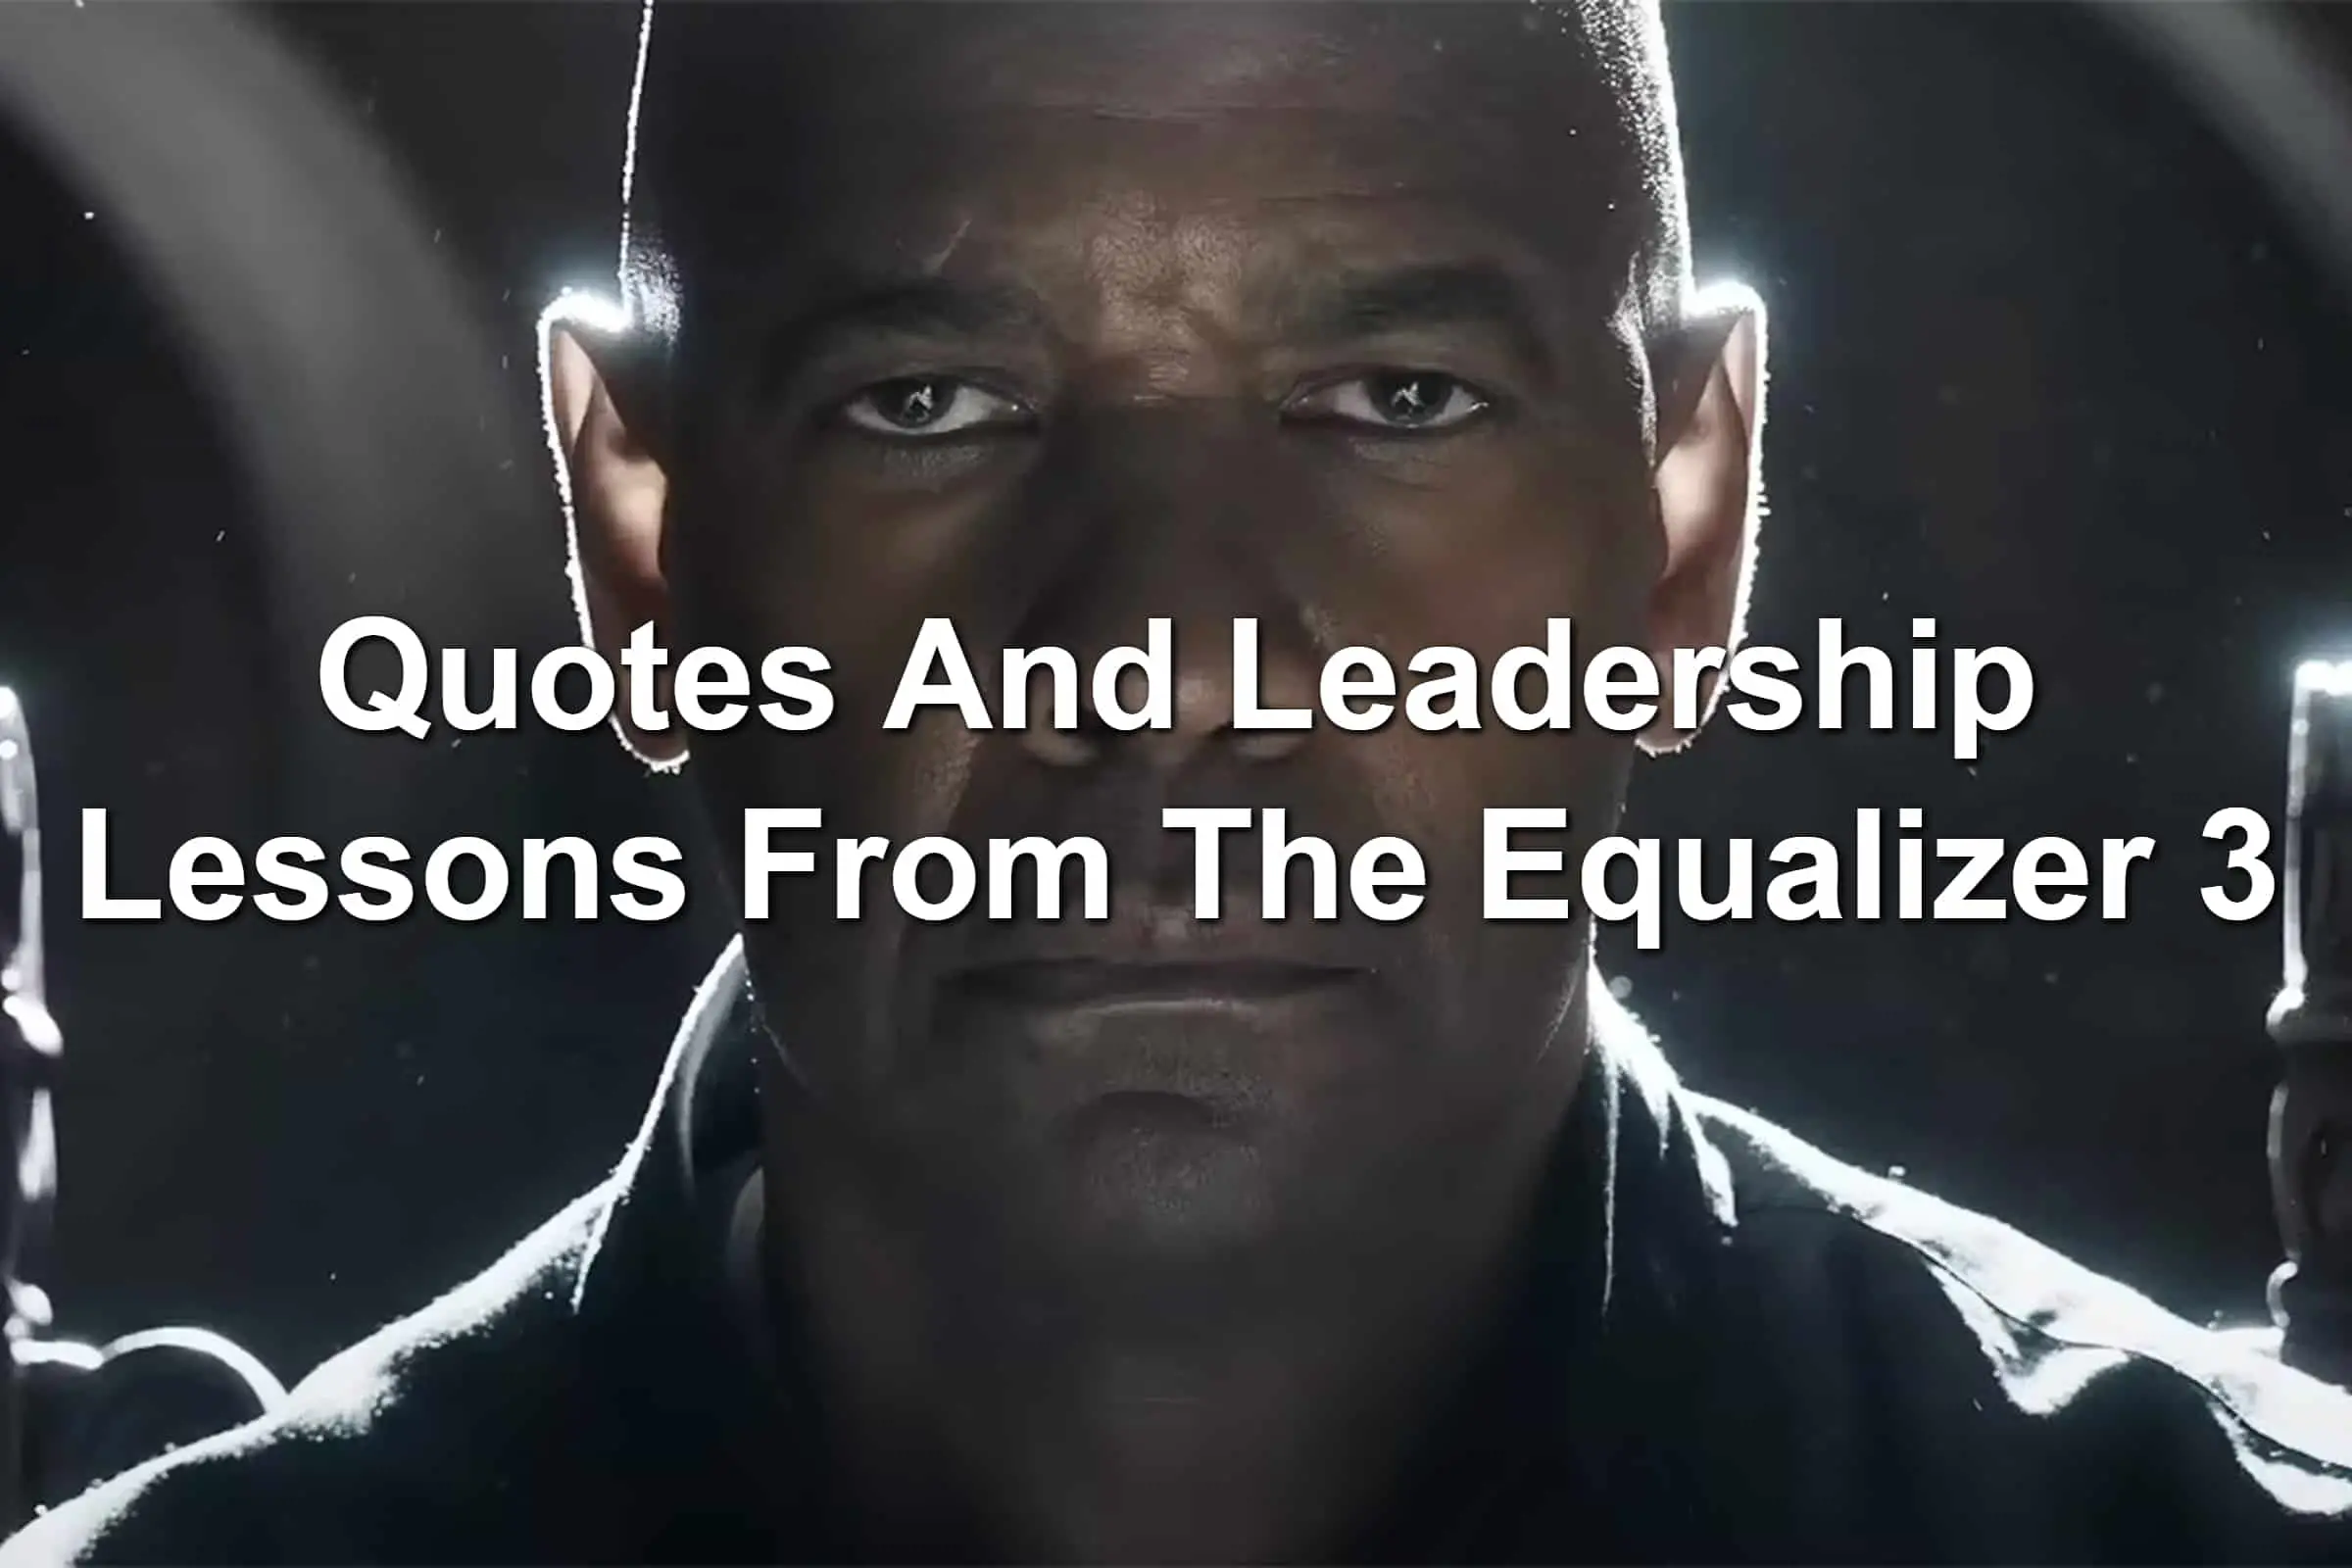 Denzel Washington in The Equalizer 3 movie. He's sitting in a chair, held captive by mobsters.